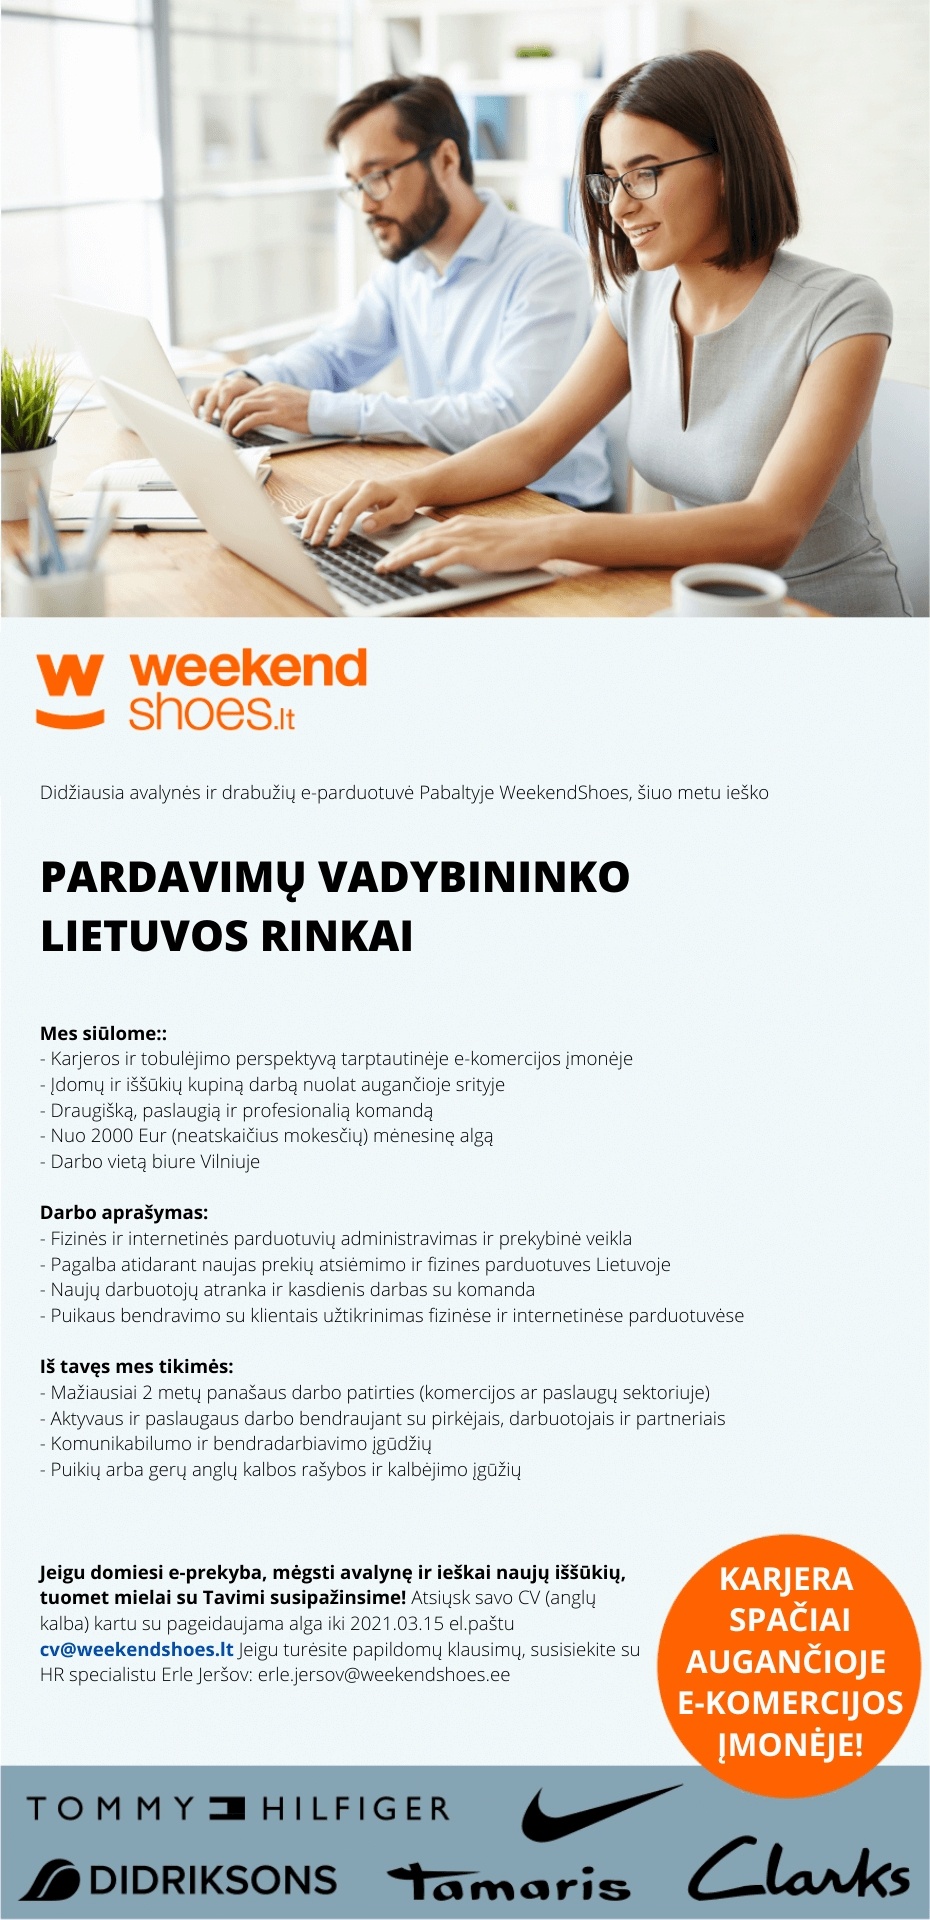 WeekendShoes.lt SALES MANAGER FOR LITHUANIAN MARKET - career & development opportunities